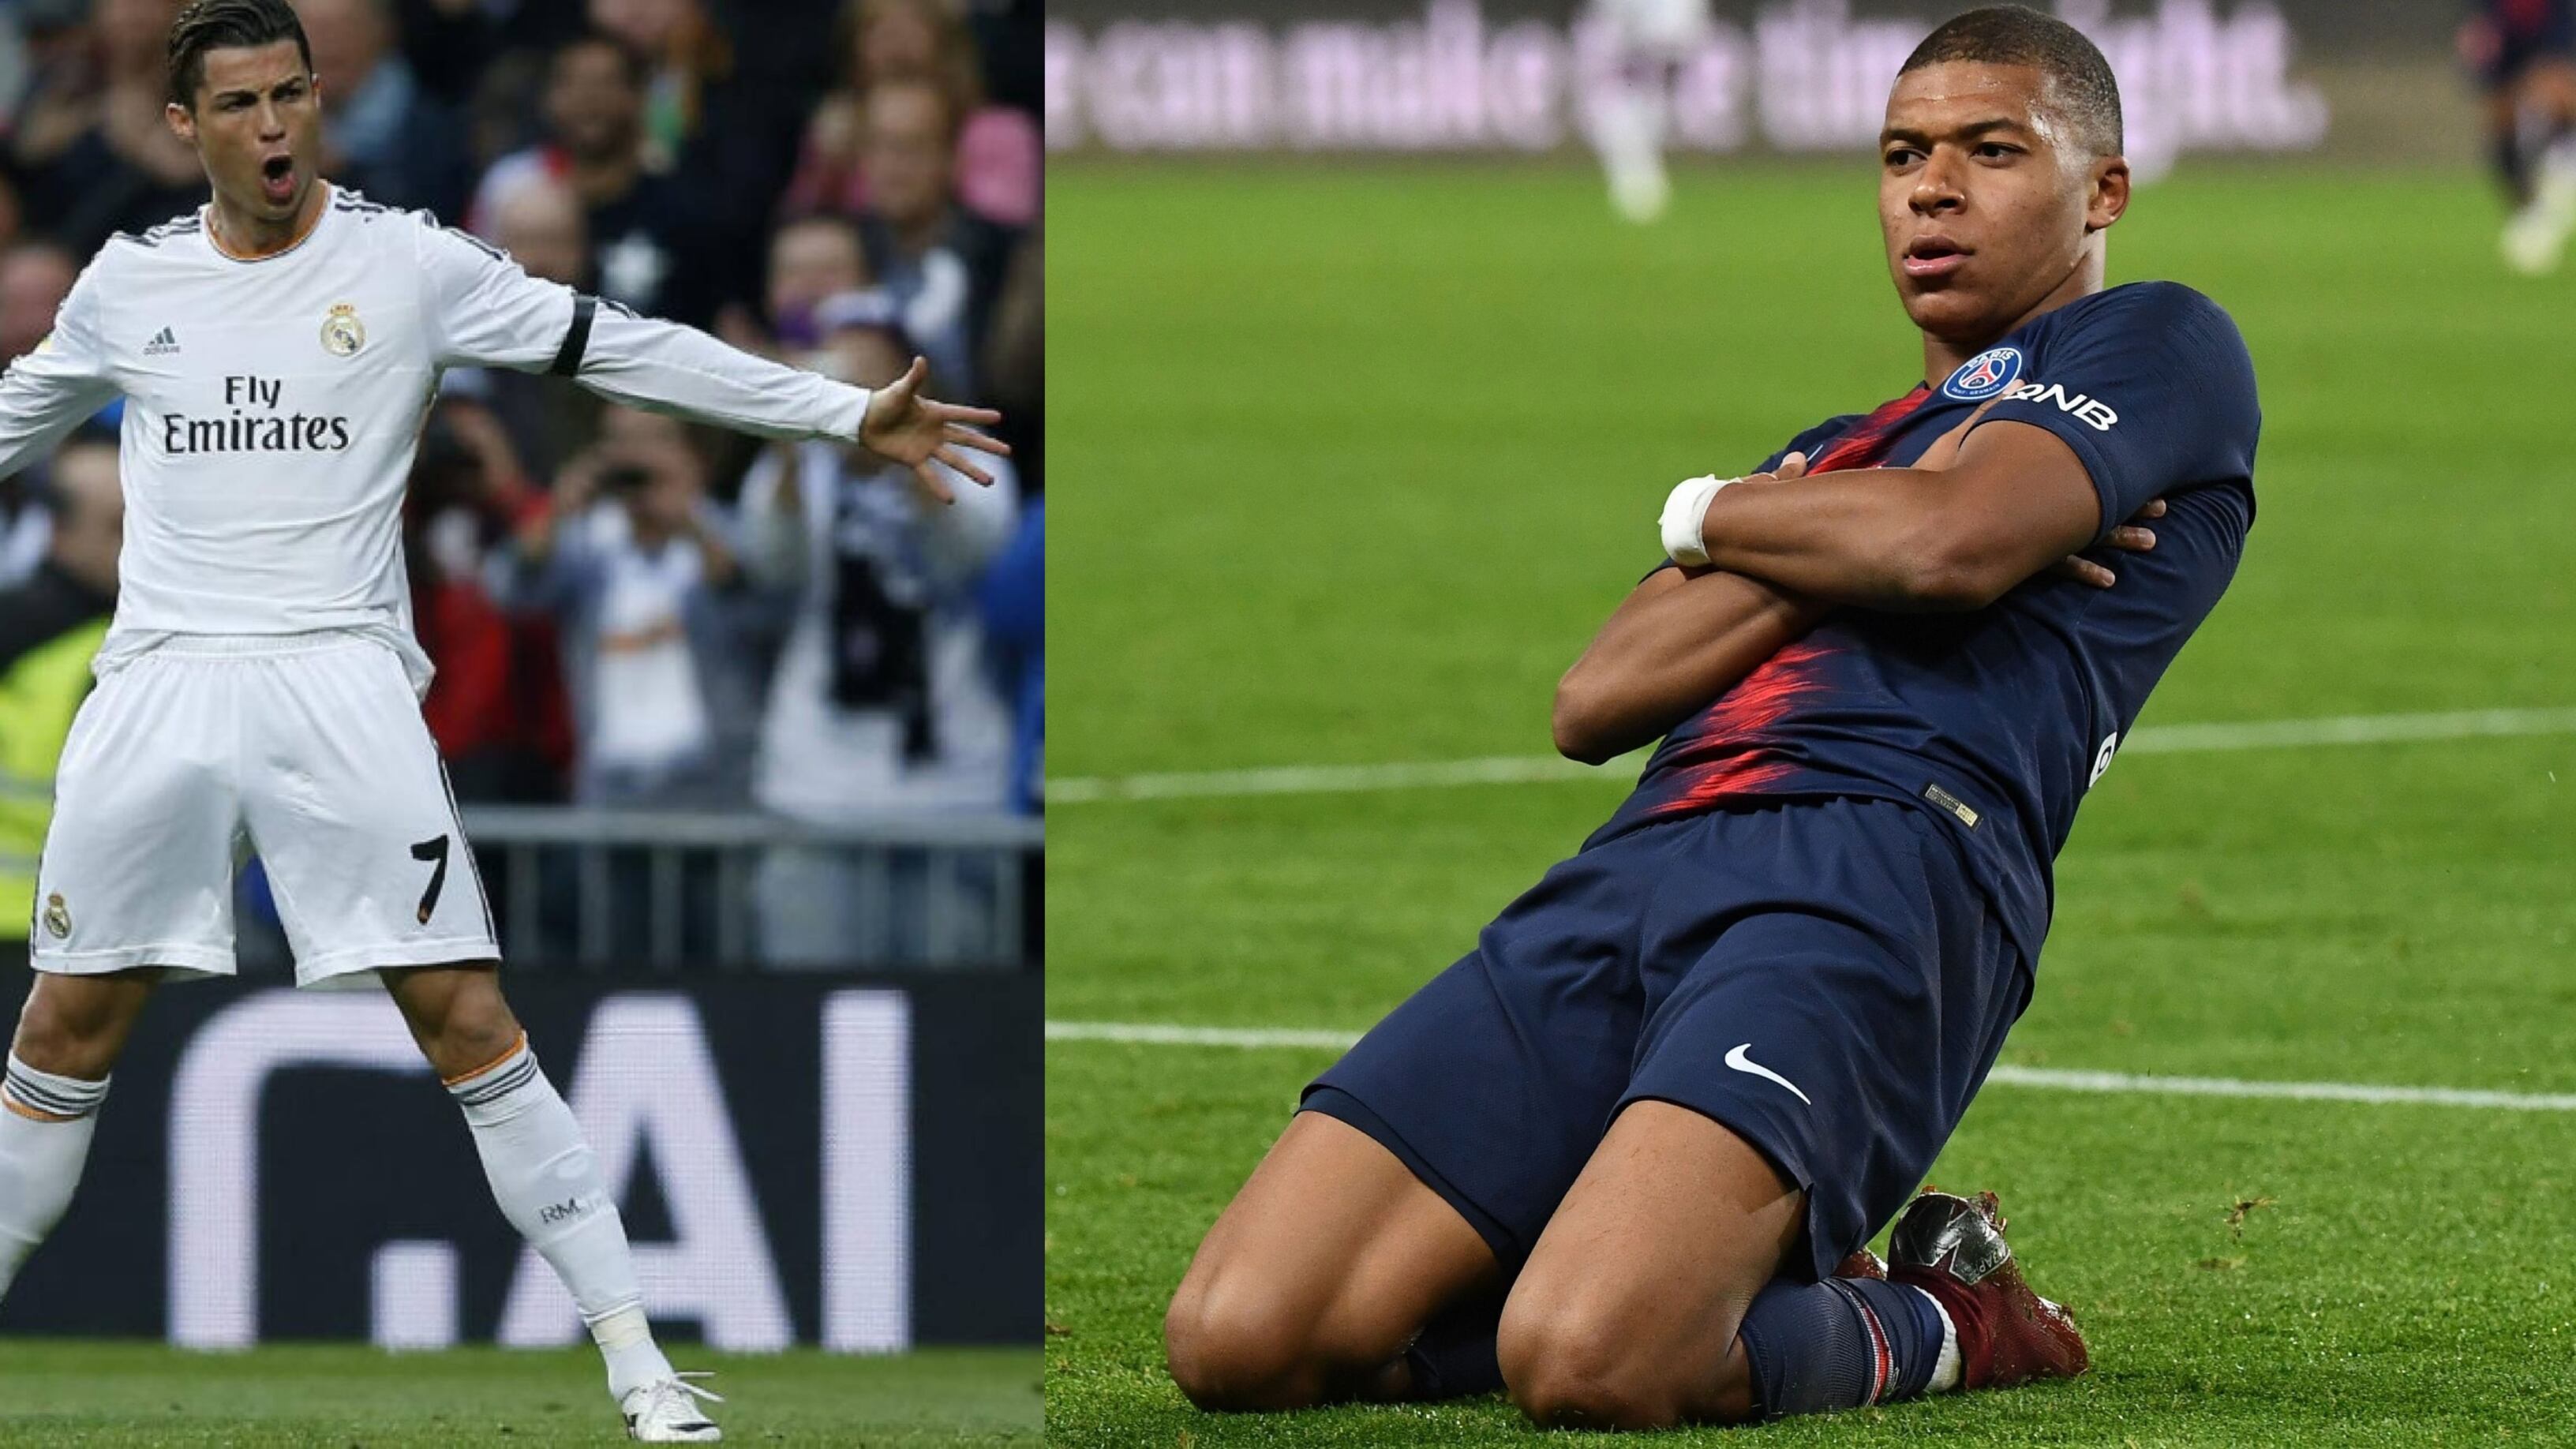 Everyone imitates Ronaldo's celebration, Mbappé wants to make a fortune with it